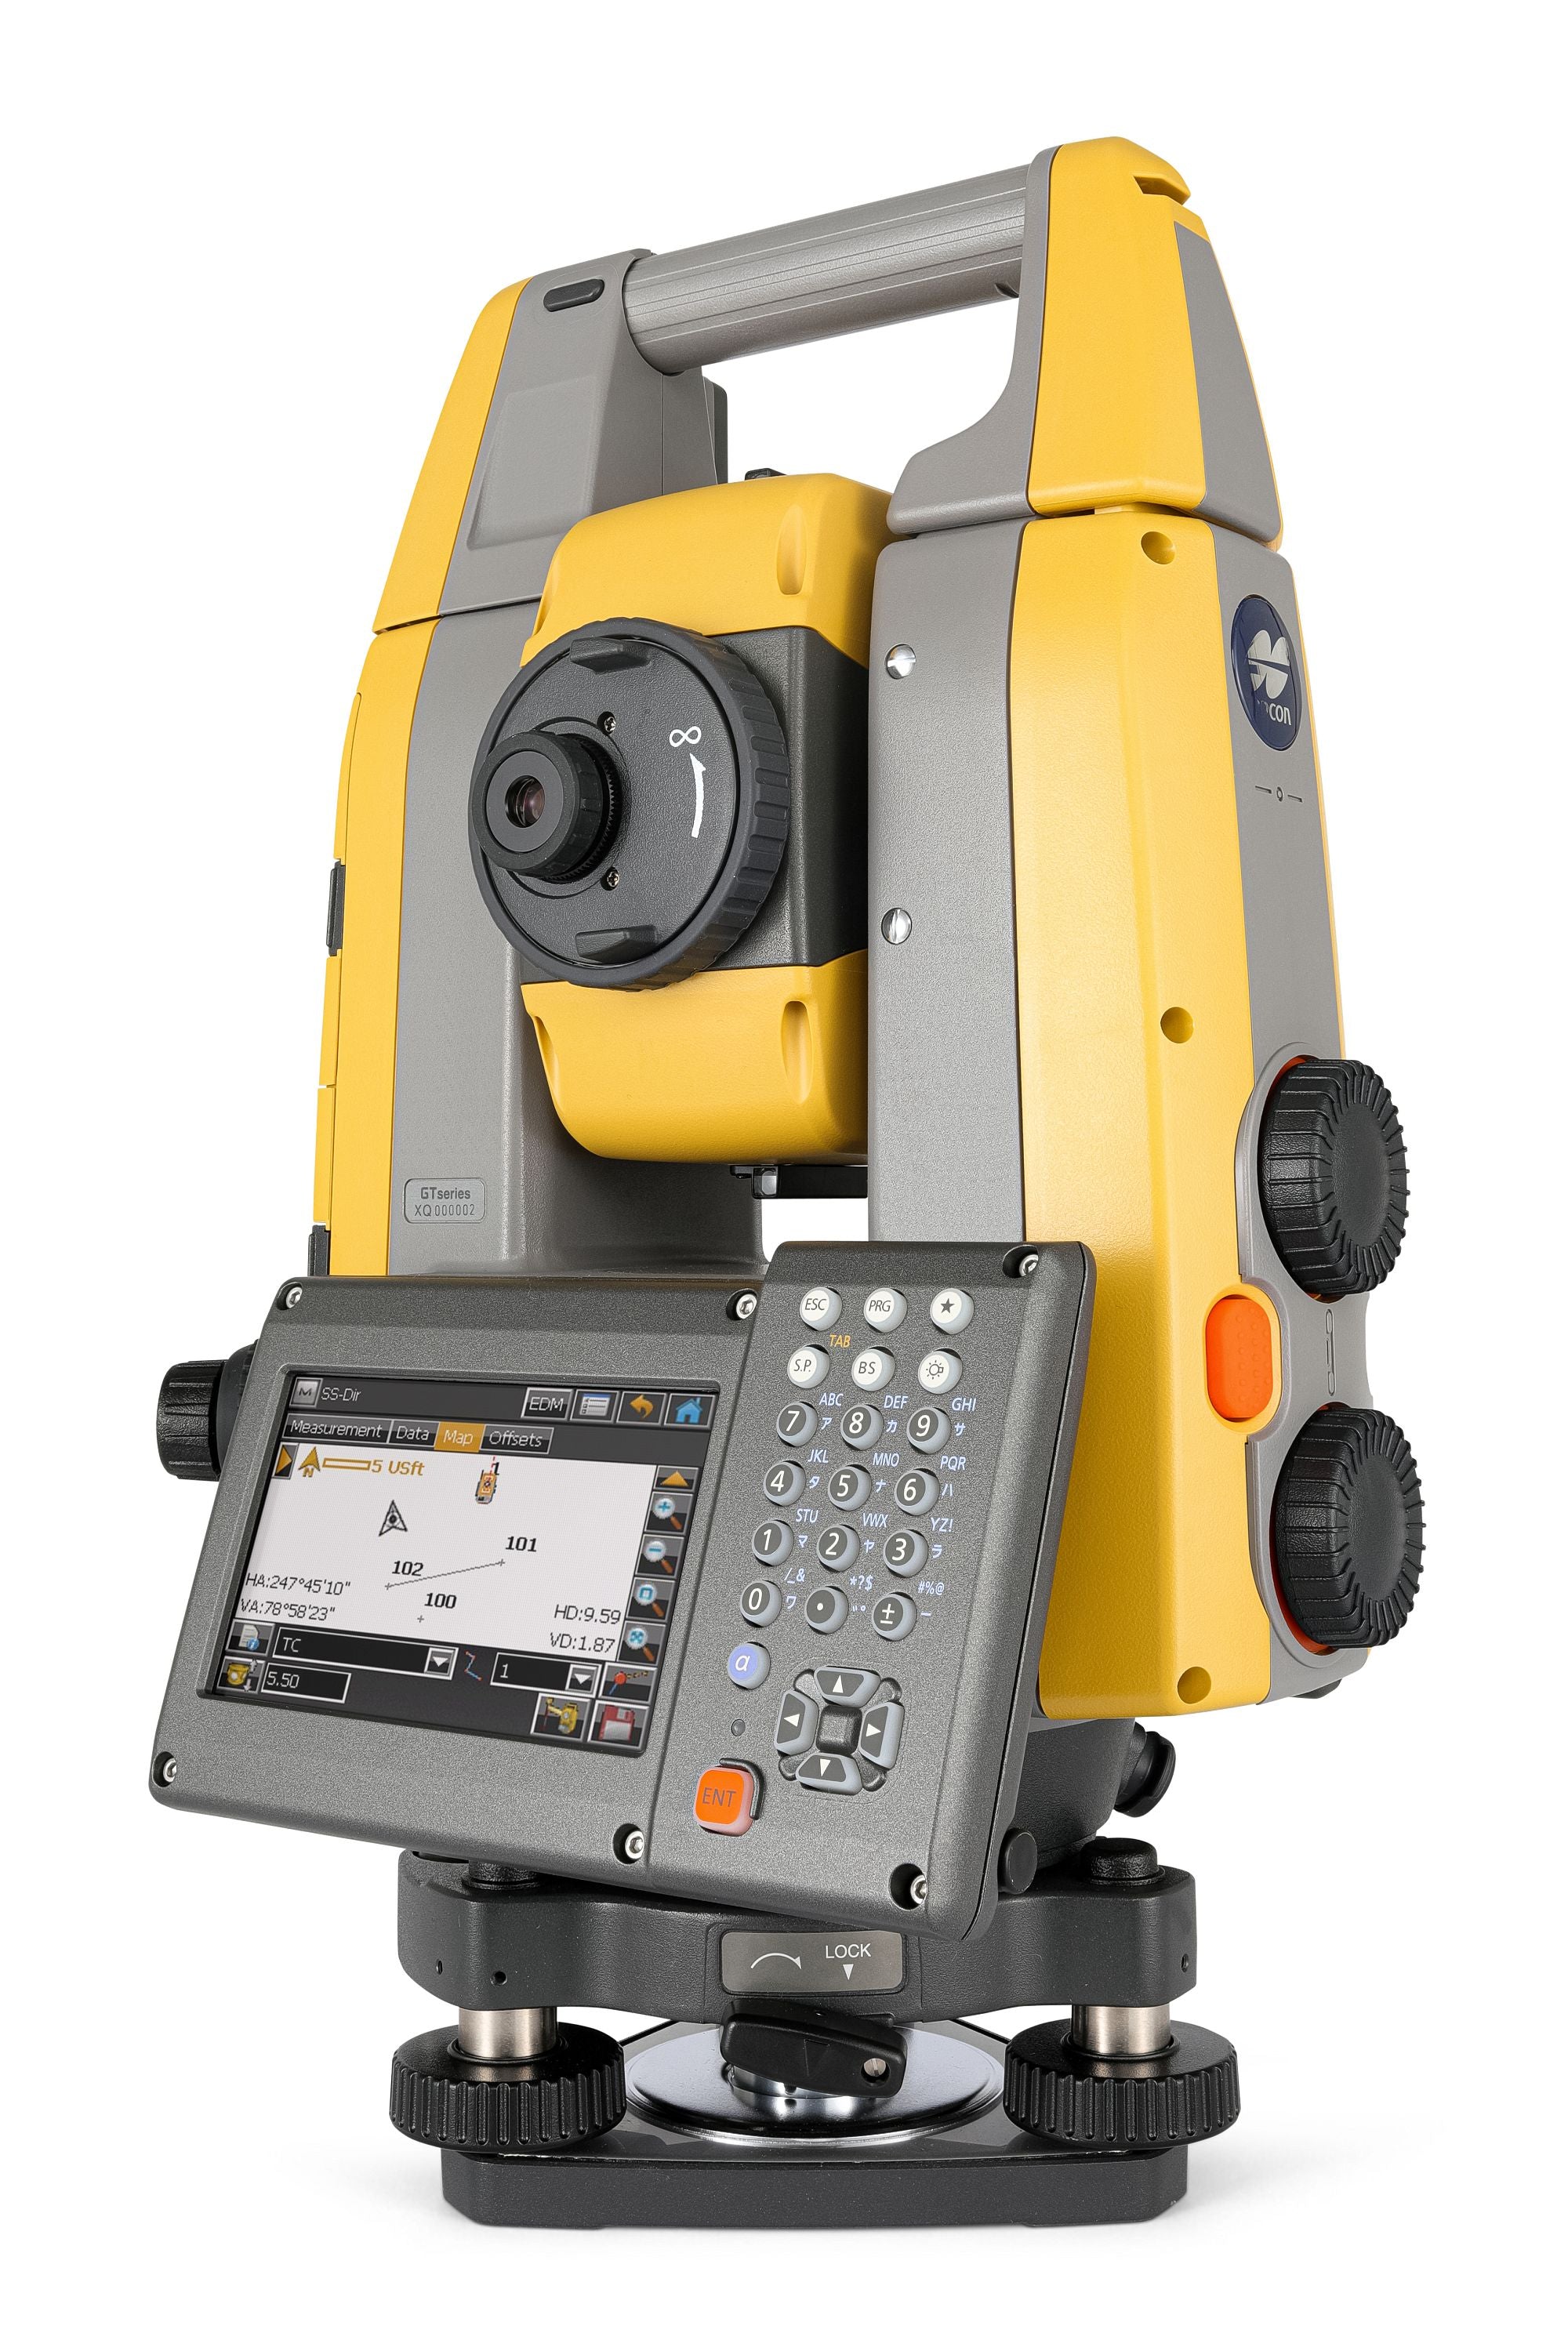 Topcon GT-600 Robotic Total Station Series